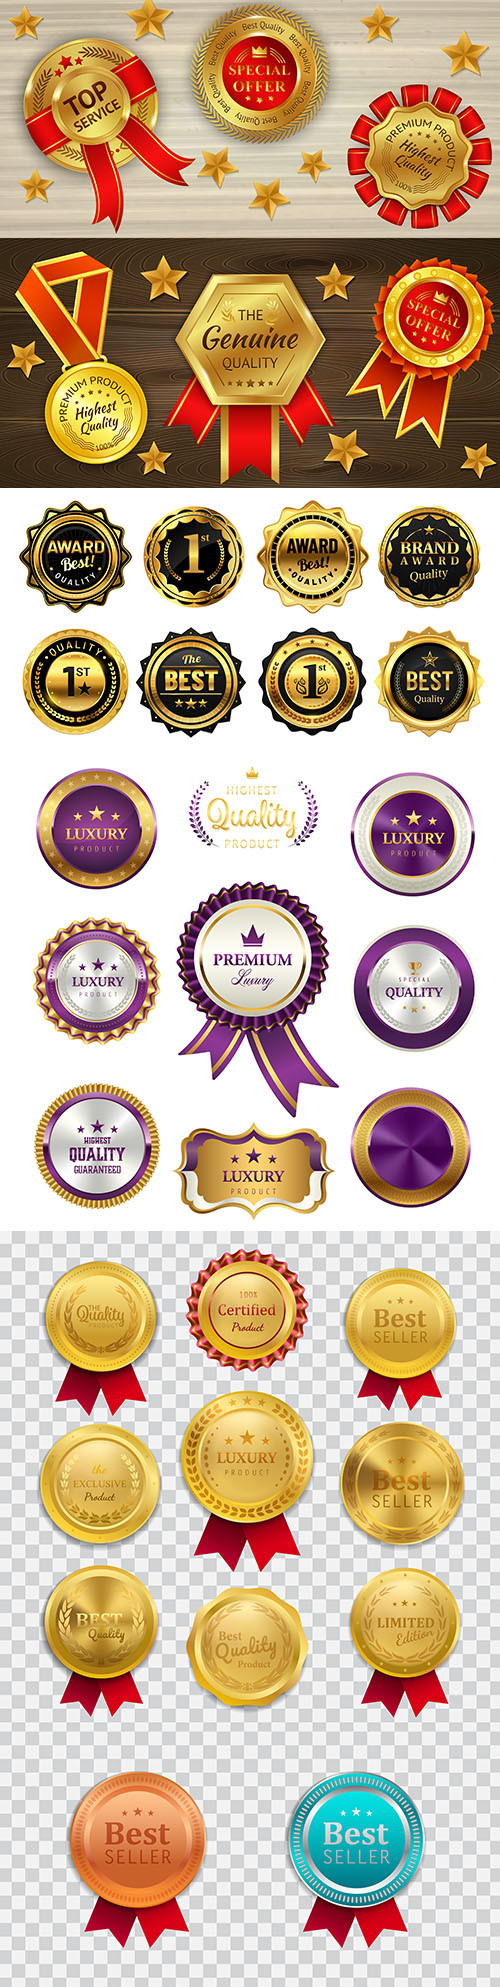 Luxury premium gold badges and labels collection 10
